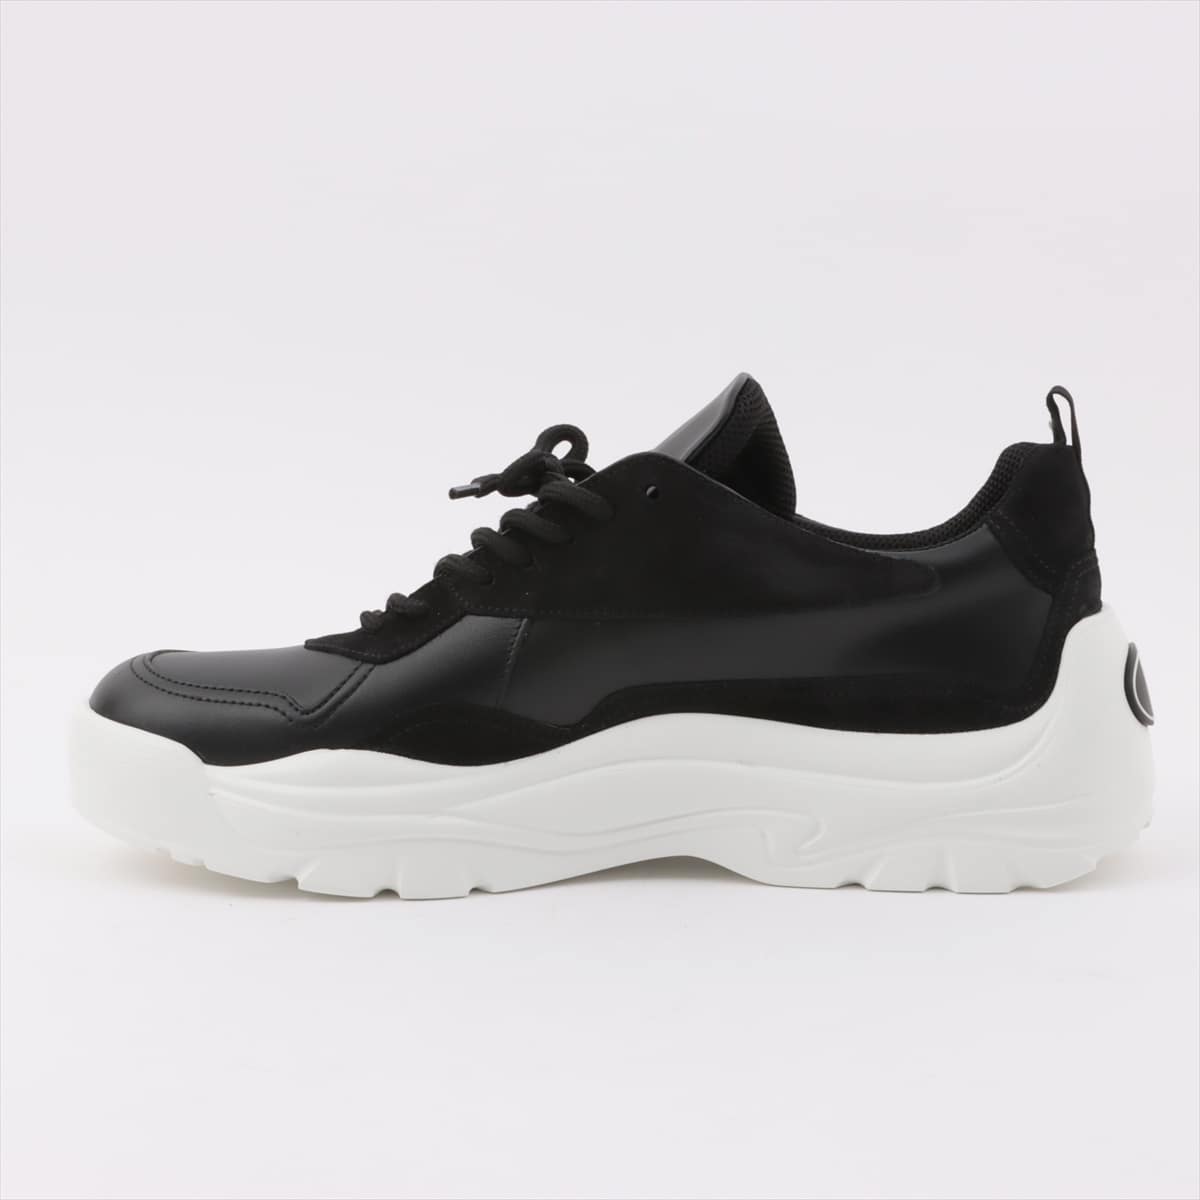 Valentino Garavani Leather Sneakers 44 Men's Black × White Gumboy sneakers Is there a replacement string